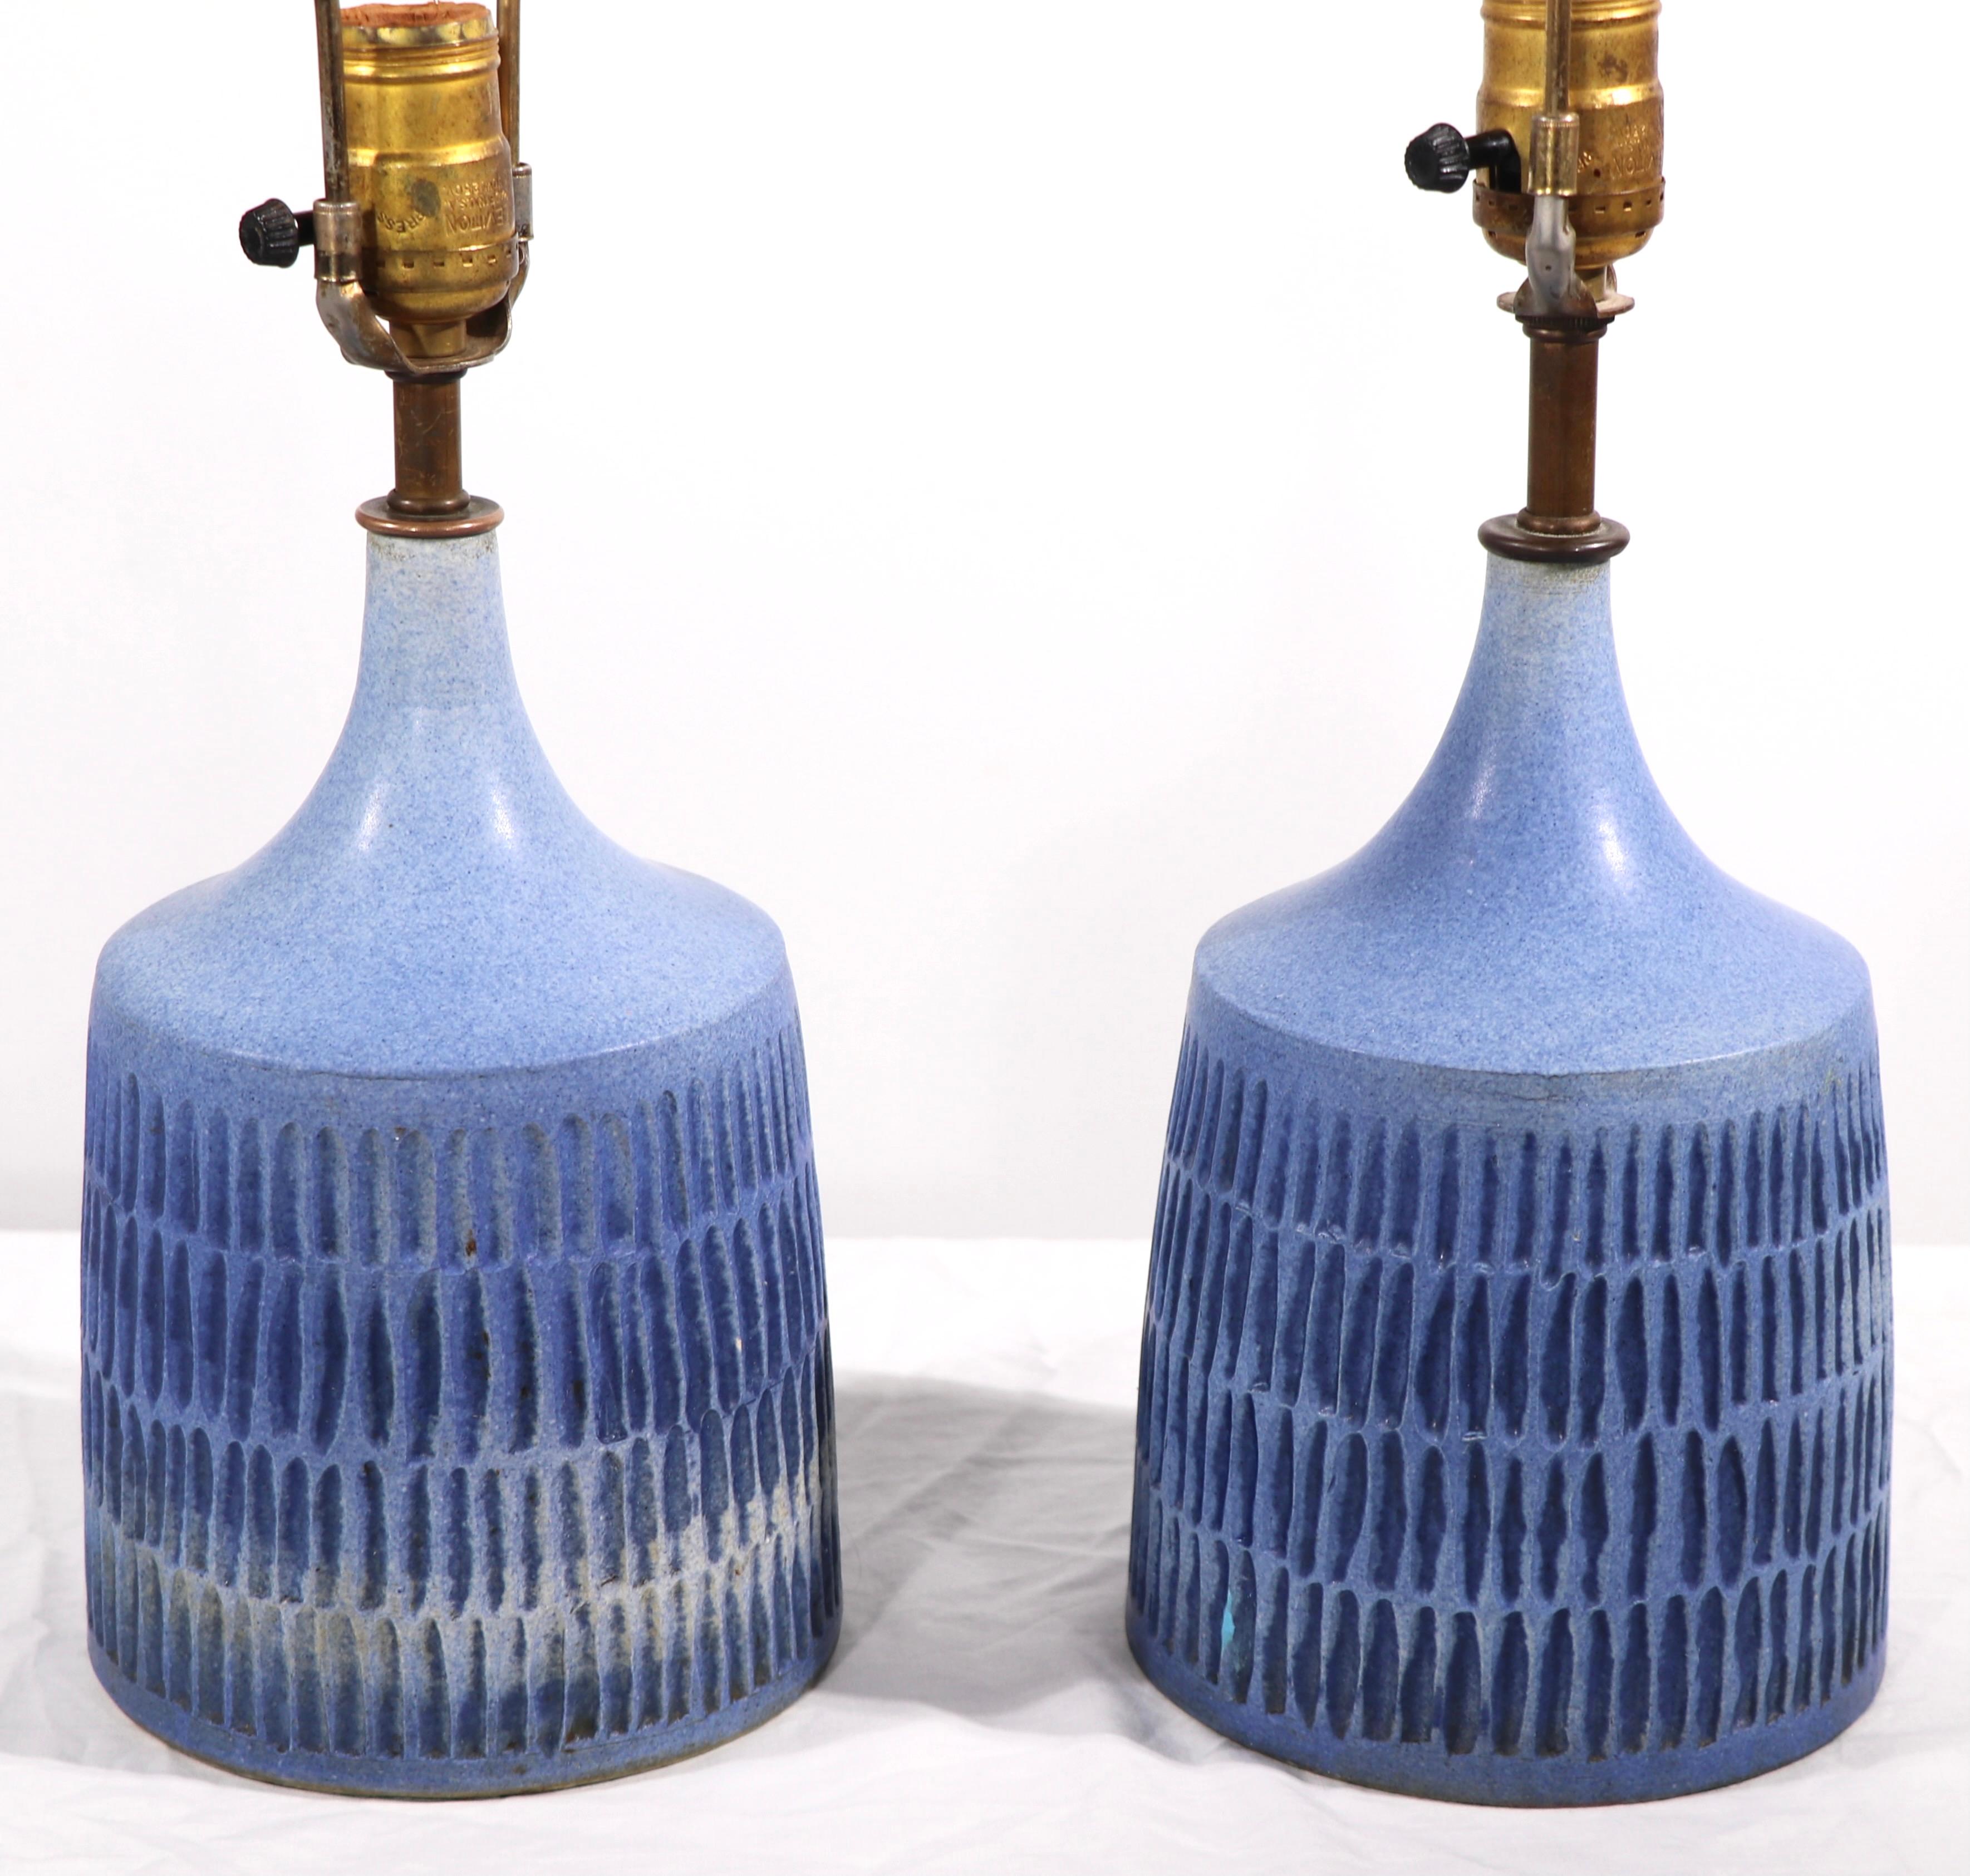 Sophisticated architectural ceramic table lamps ocean blue with textural surface. Both are in good original, clean and working condition, one has a recolored glaze flaw, please see images. In the manner of Sohoim, unsigned. The lamps are offered as